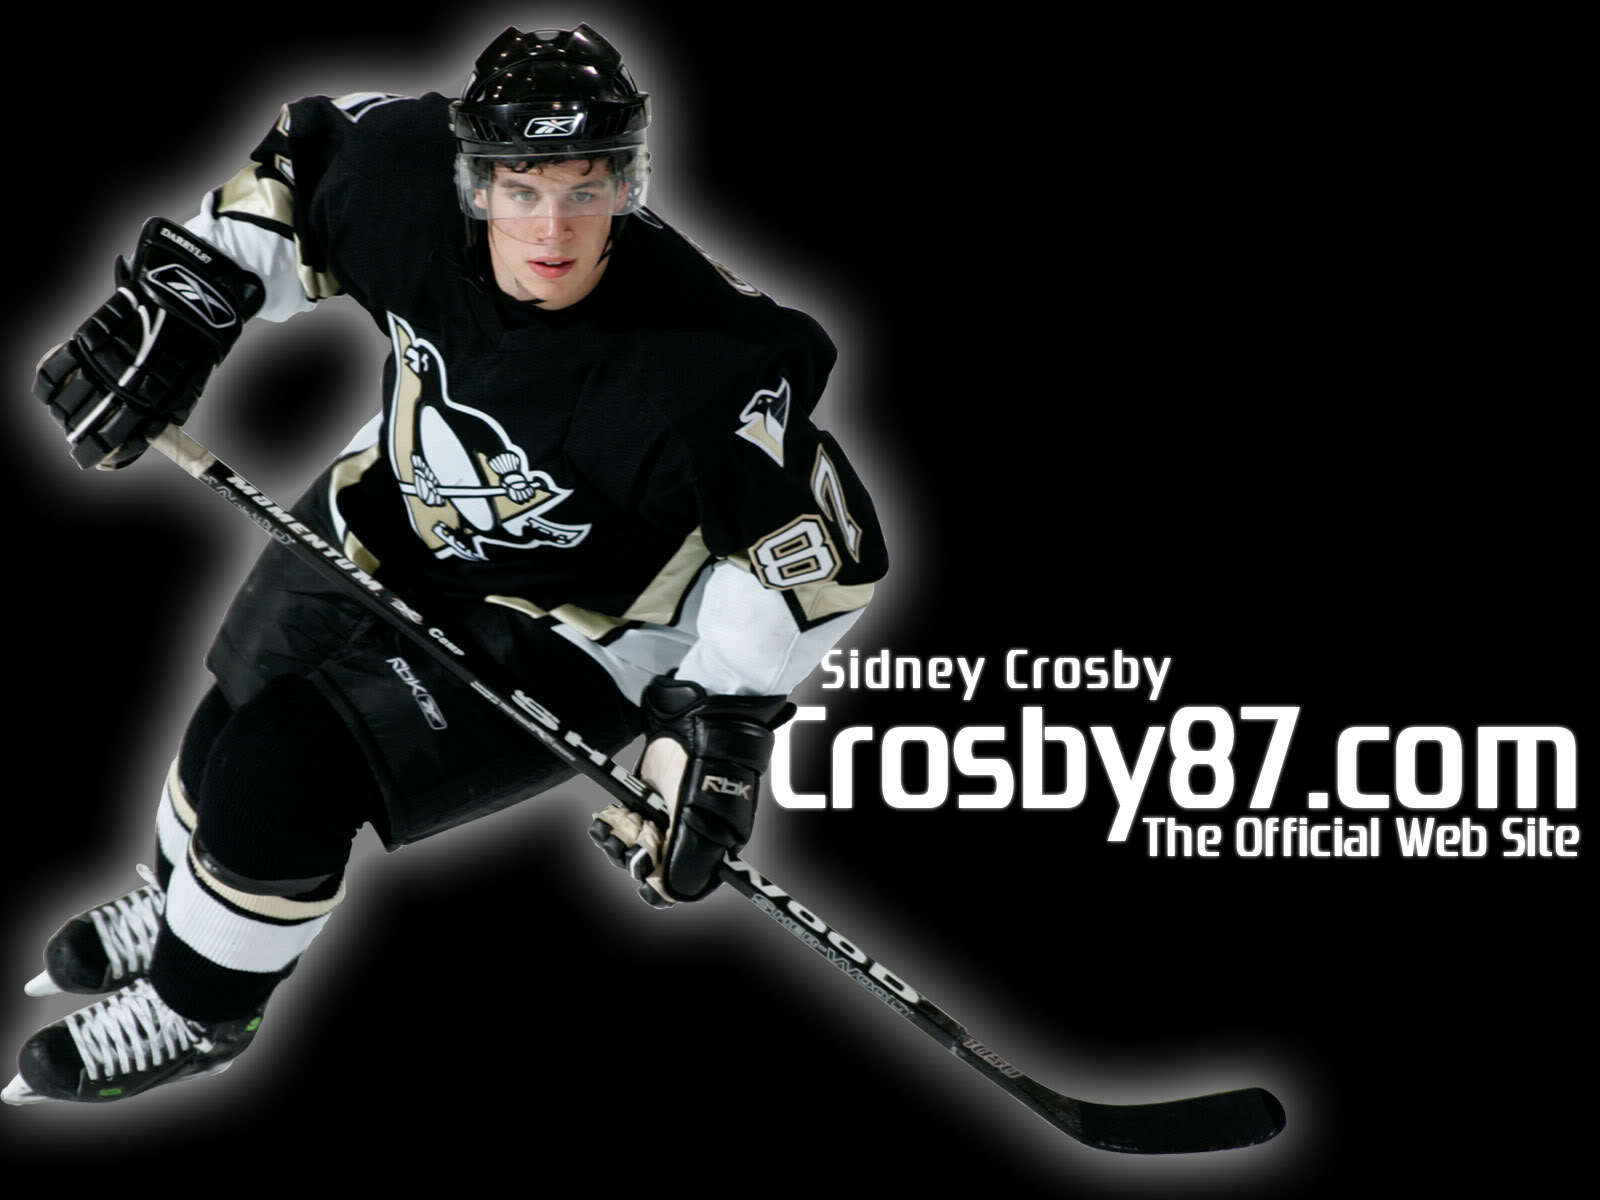 Sidney Crosby on black background wallpapers and images   wallpapers